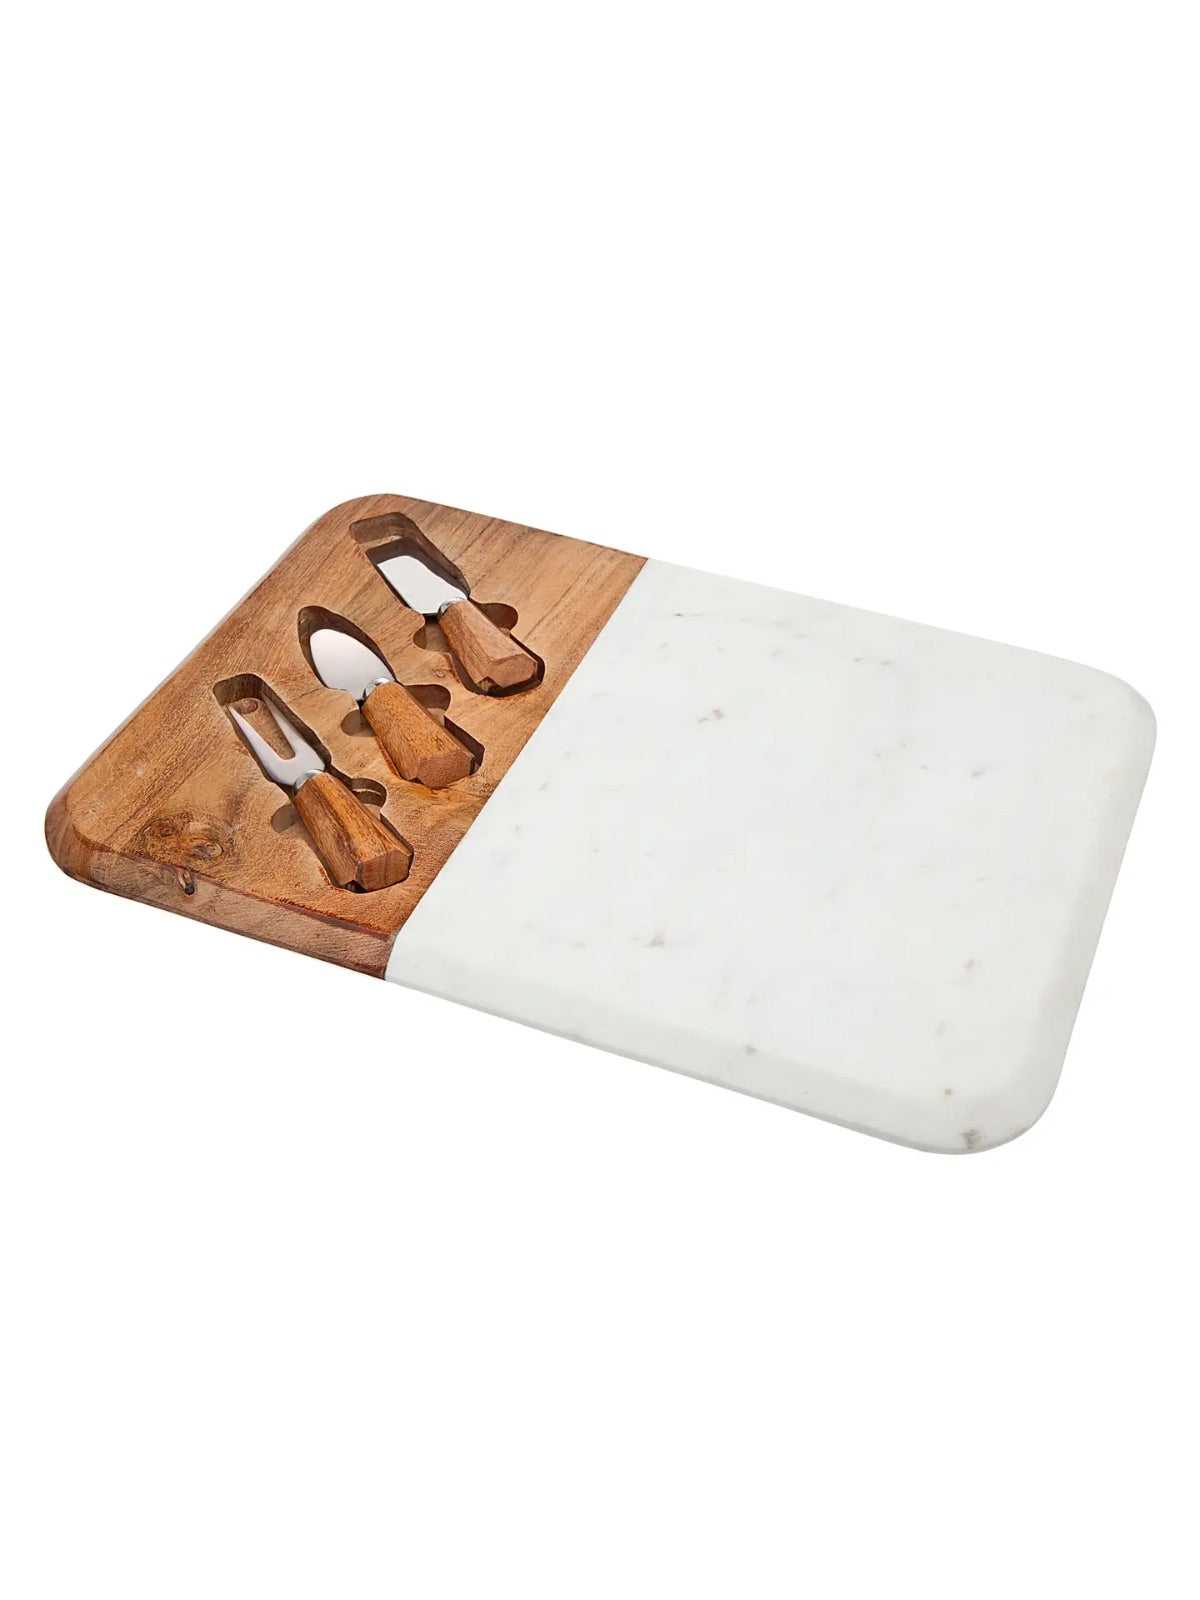 Wood and Marble Cheese Board Sophisticated Set with Cheese Spreaders. Handcrafted Premium wood and sleek marble blend functionality and elegance. Product dimensions 16L X 10W X 1.5H inches.